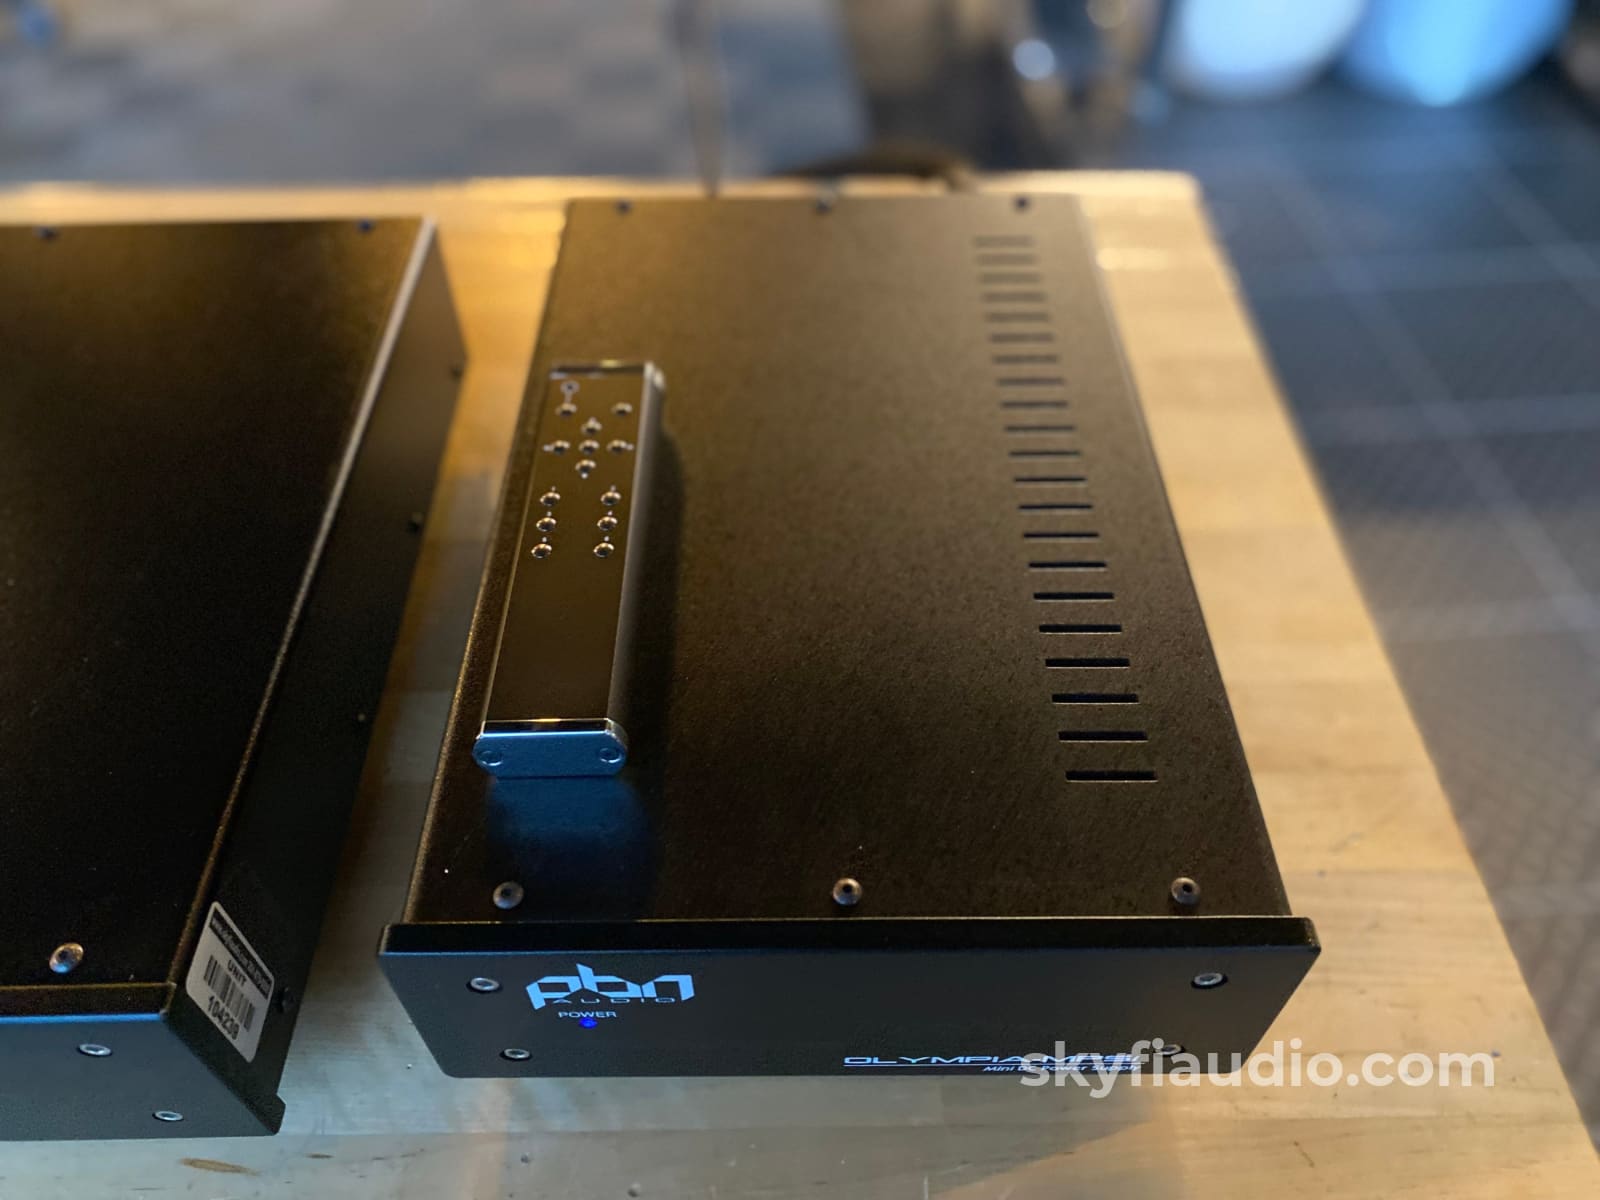 Pbn Olympia Li And Mpsi Power Supply (Dual Chassis) Preamp $15K Msrp Preamplifier